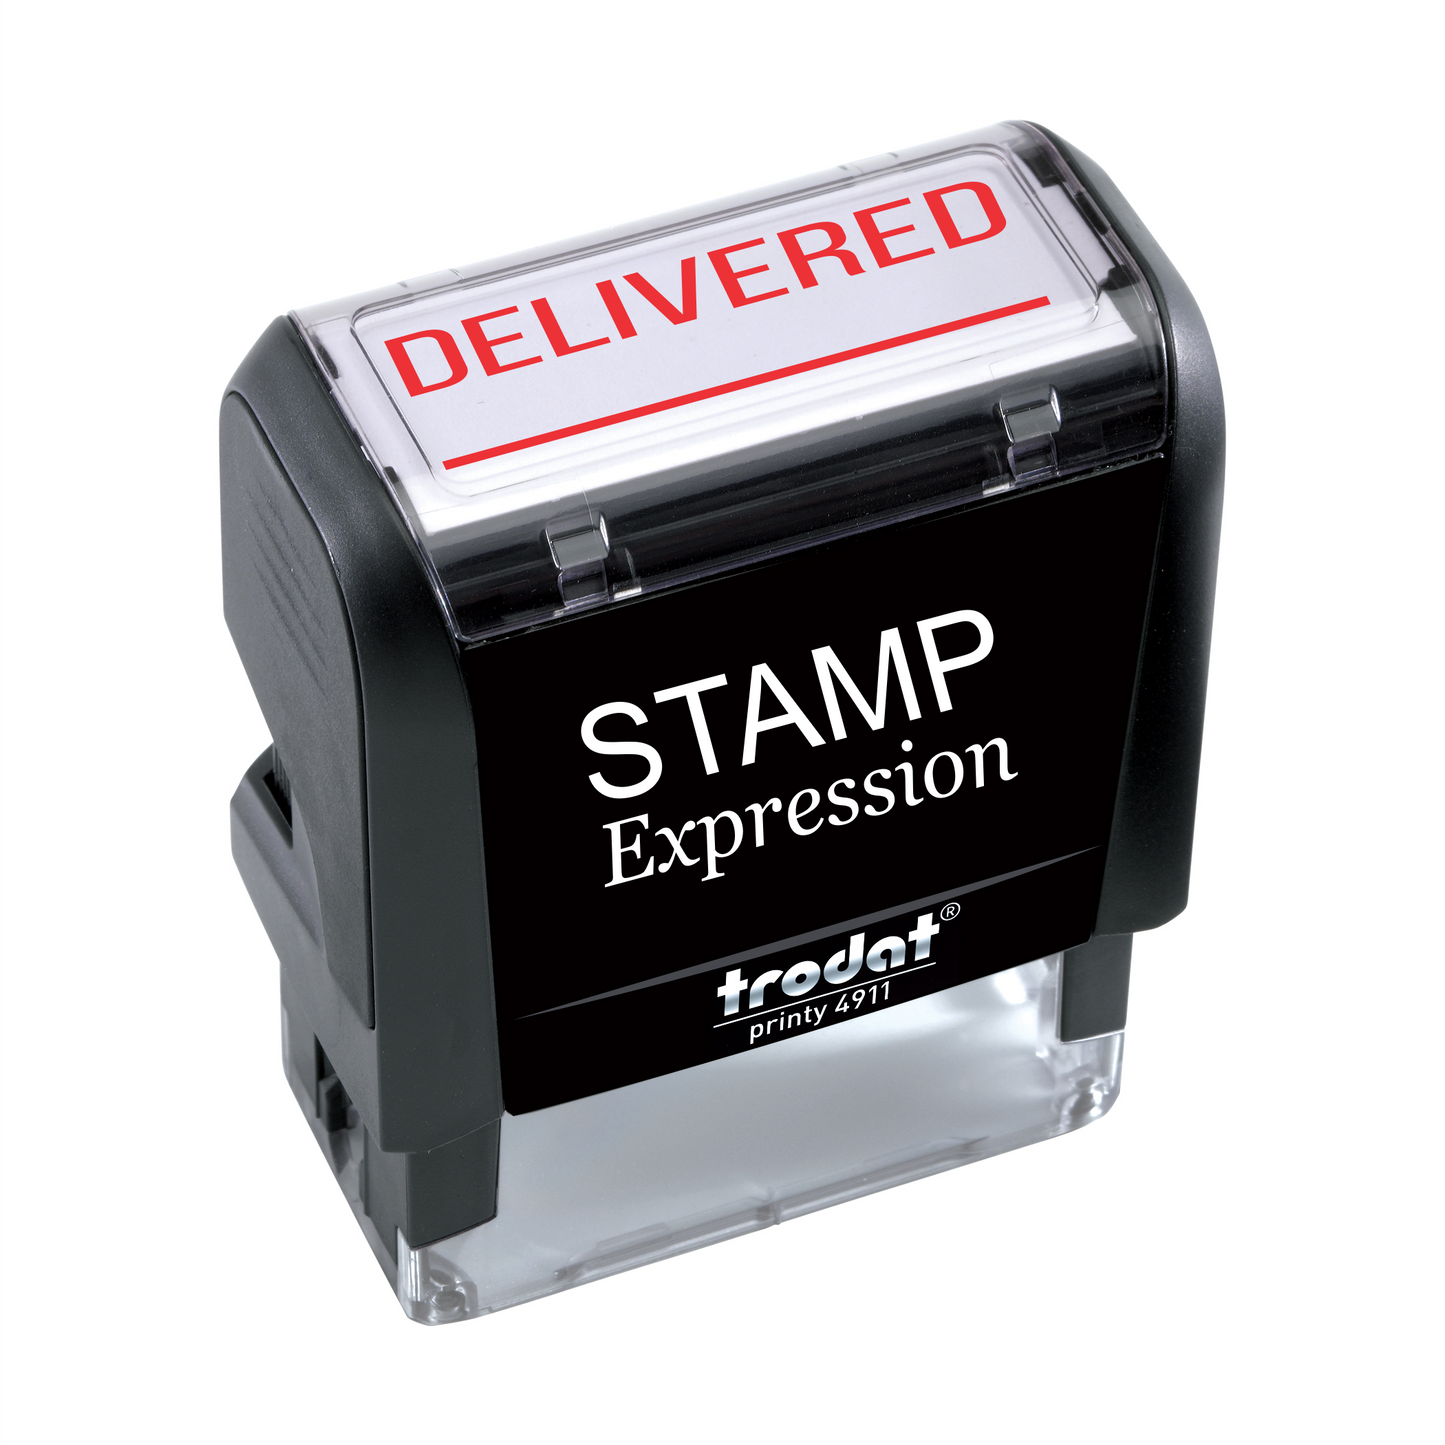 Delivered with Line Office Self Inking Rubber Stamp (SH-5251)